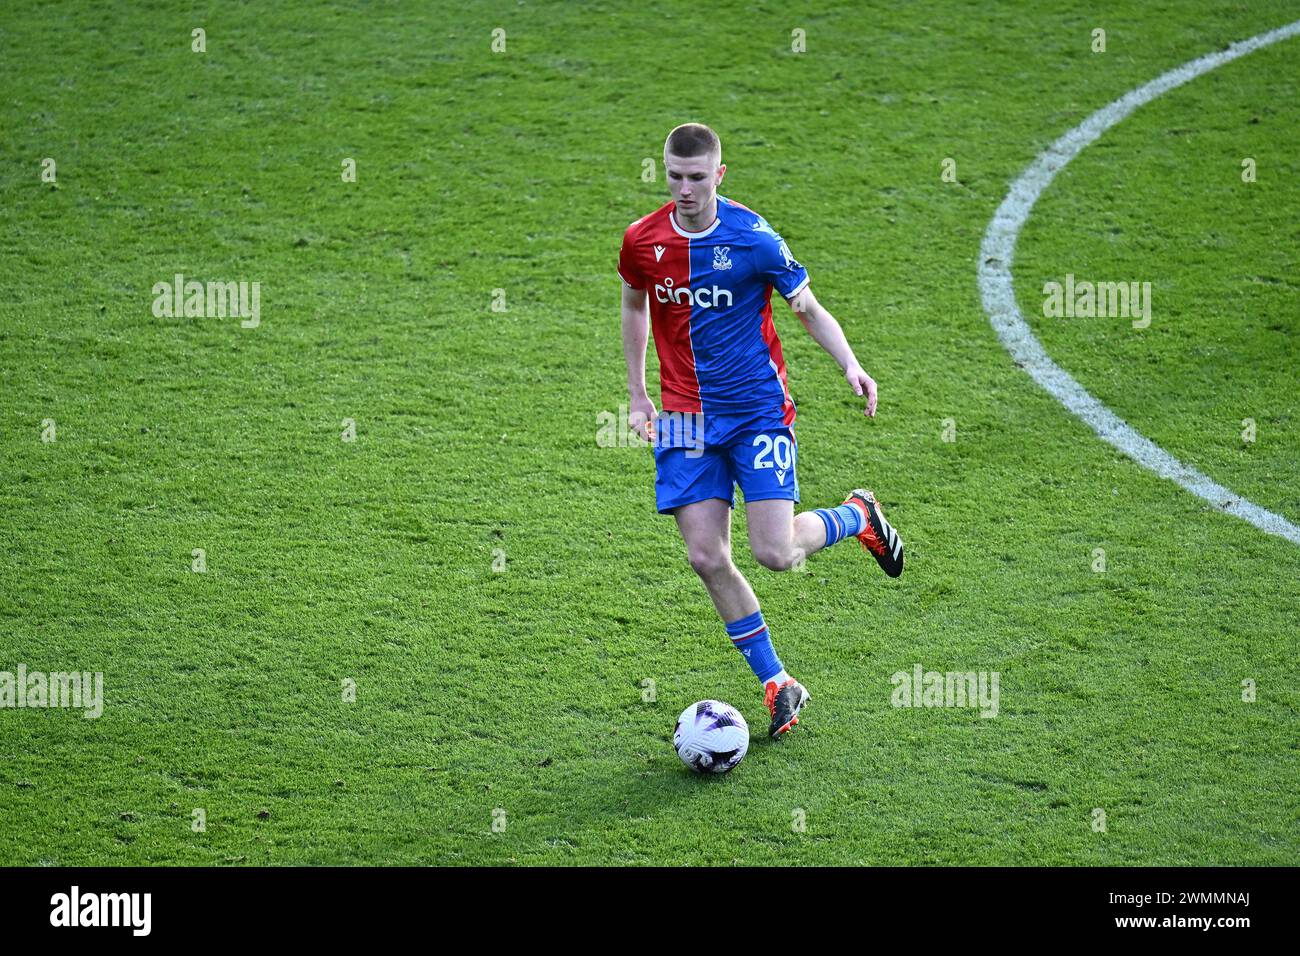 LONDON, ENGLAND - FEBRUARY 24: Adam Wharton of Crystal Palace during the Premier League match between Crystal Palace and Burnley FC at Selhurst Park o Stock Photo